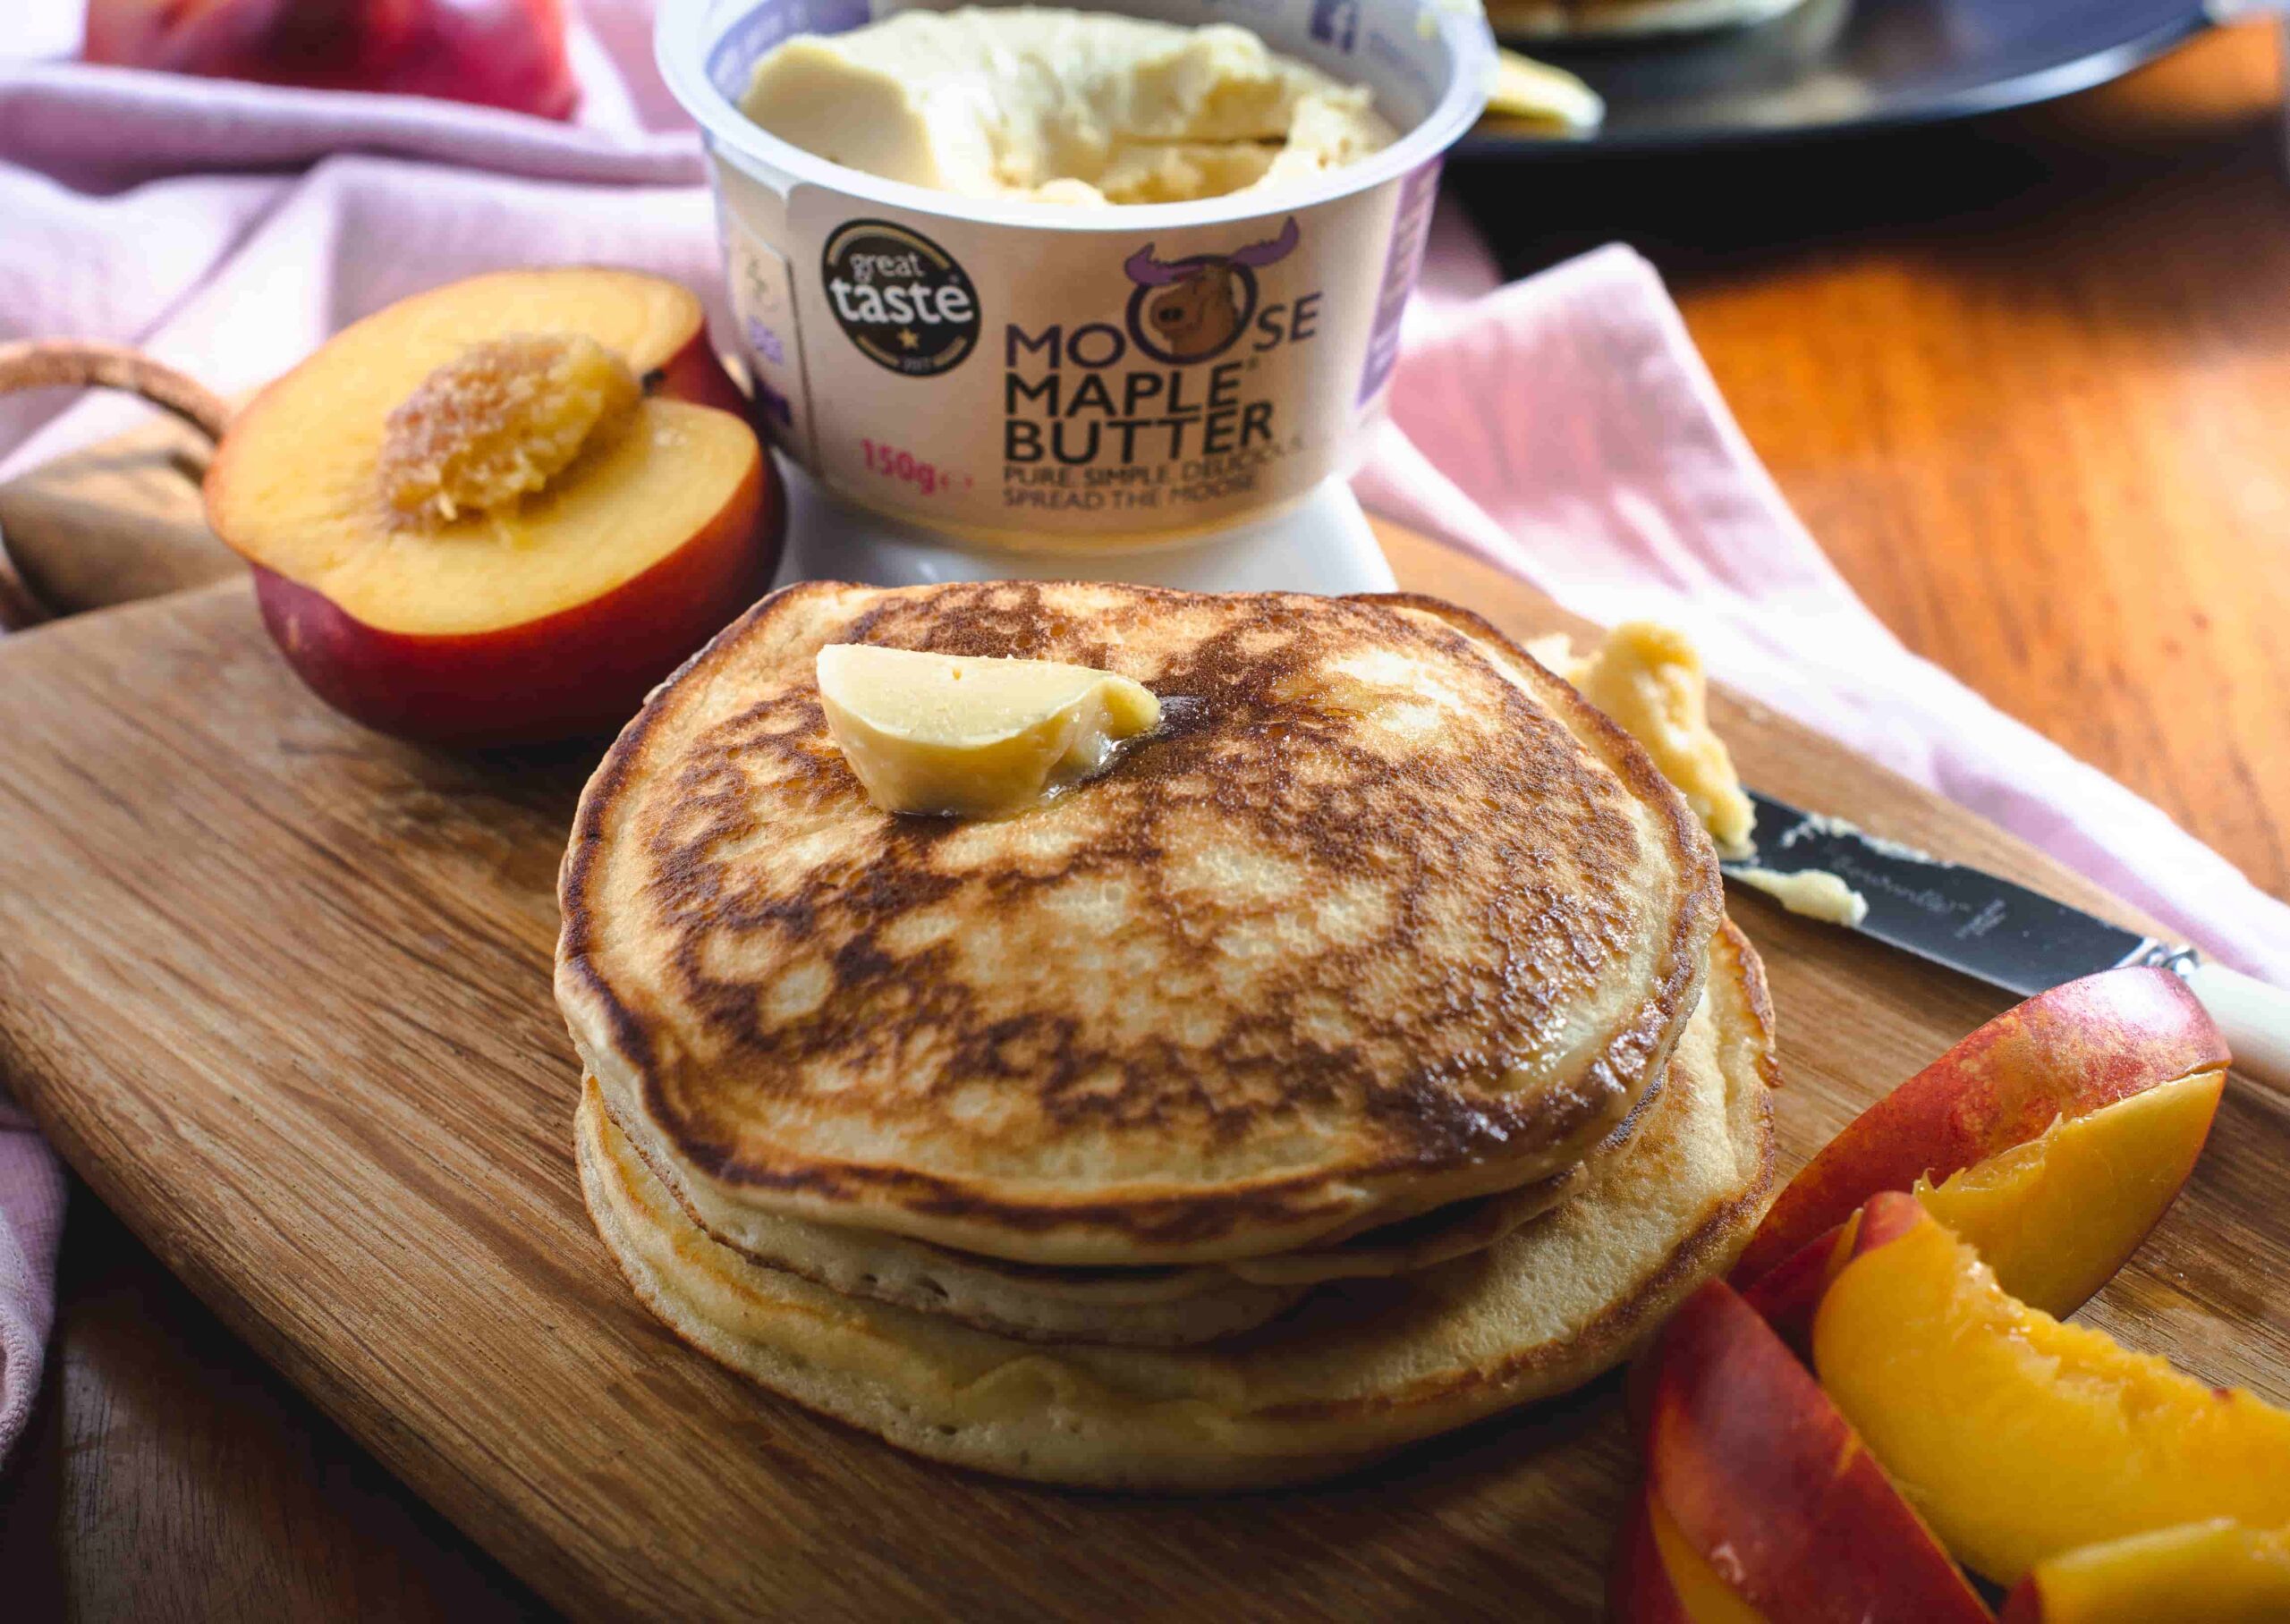 Pancakes served with fresh necatines and Moose maple Butter on a wooden breakfast table.